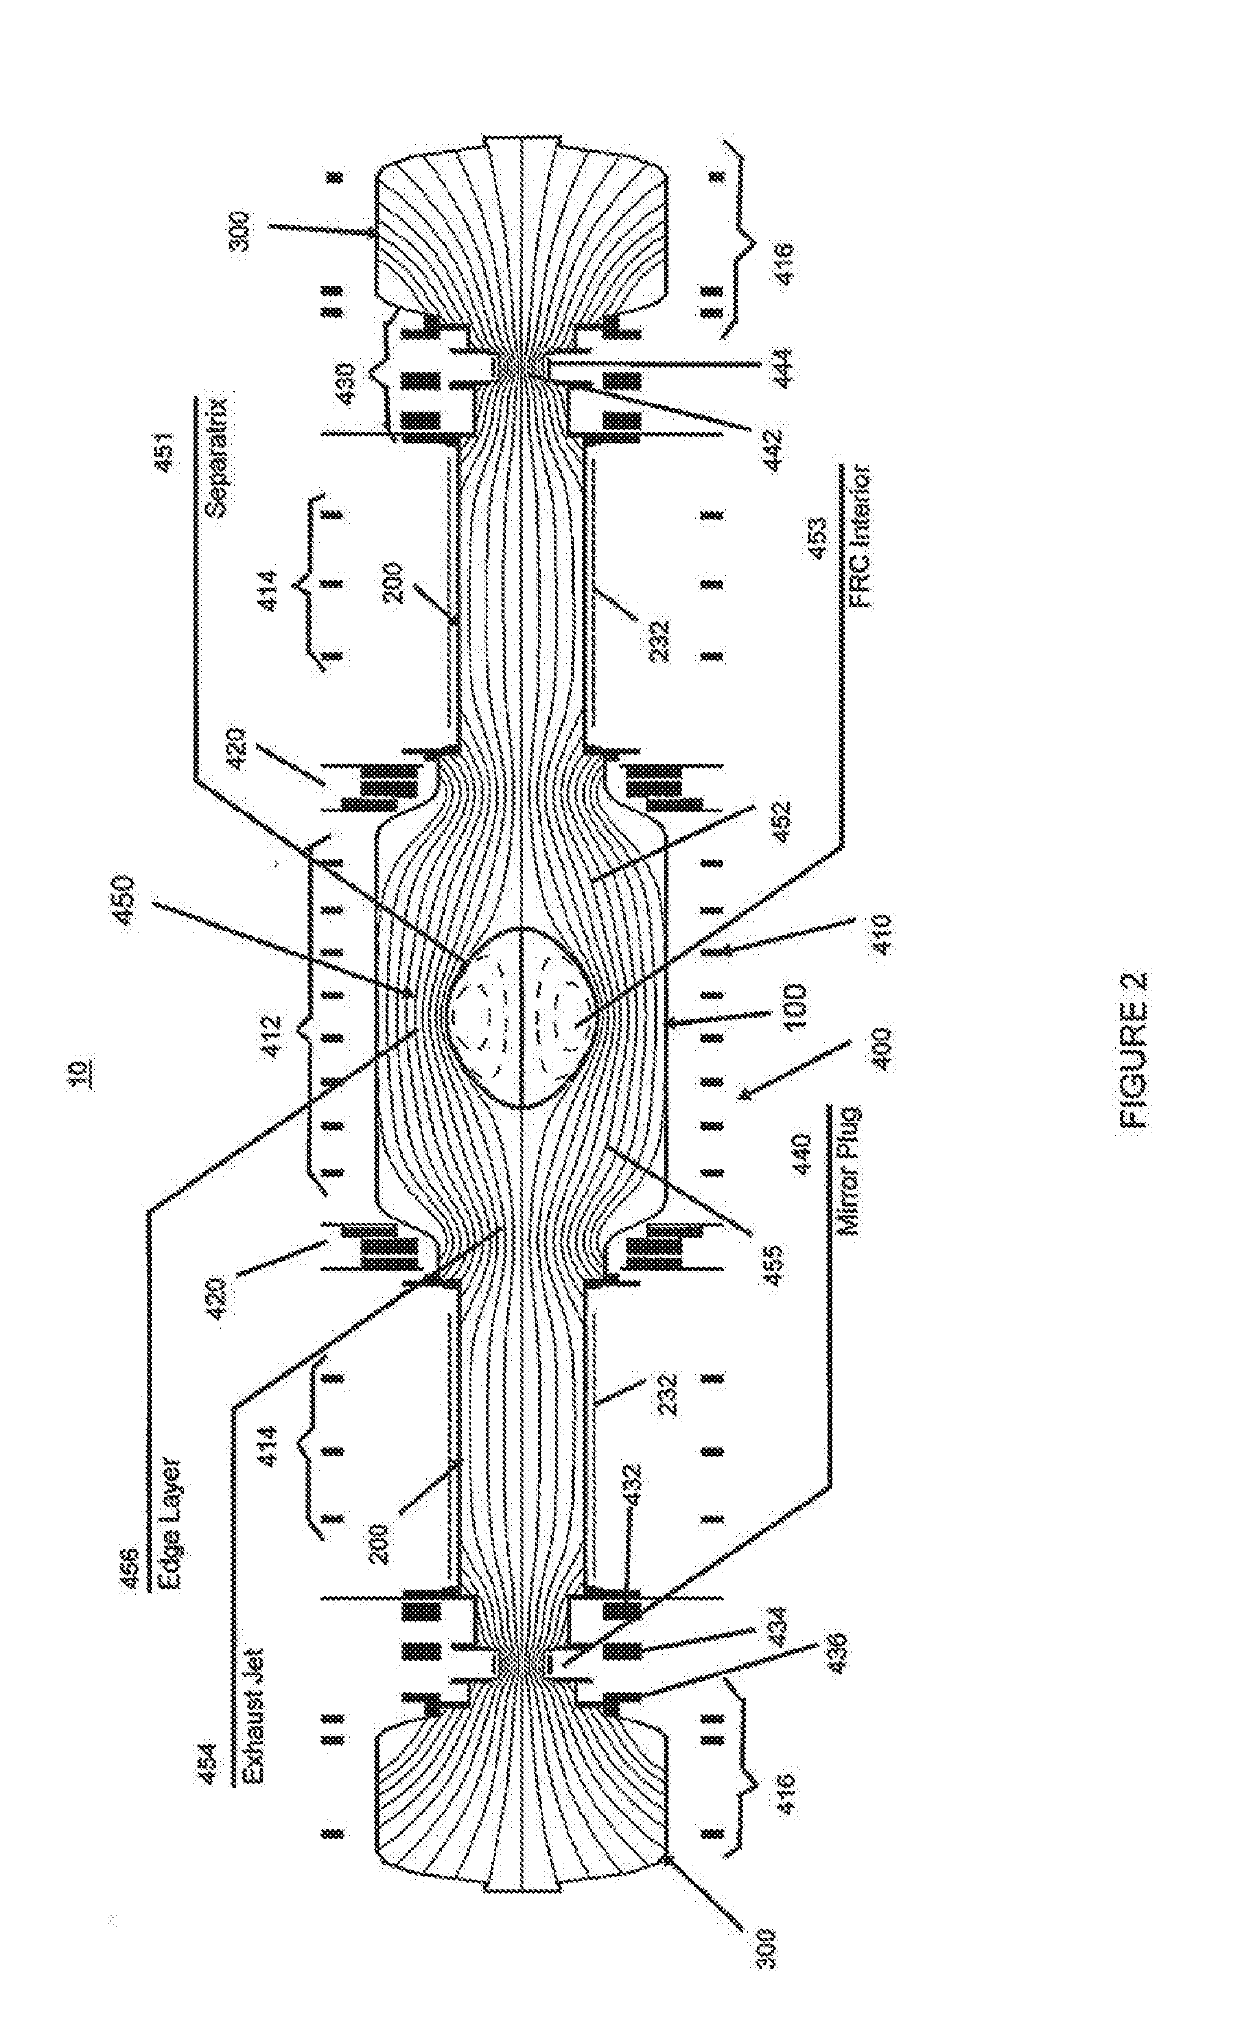 Systems and methods for improved sustainment of a high performance frc elevated energies utilizing neutral beam injectors with tunable beam energies